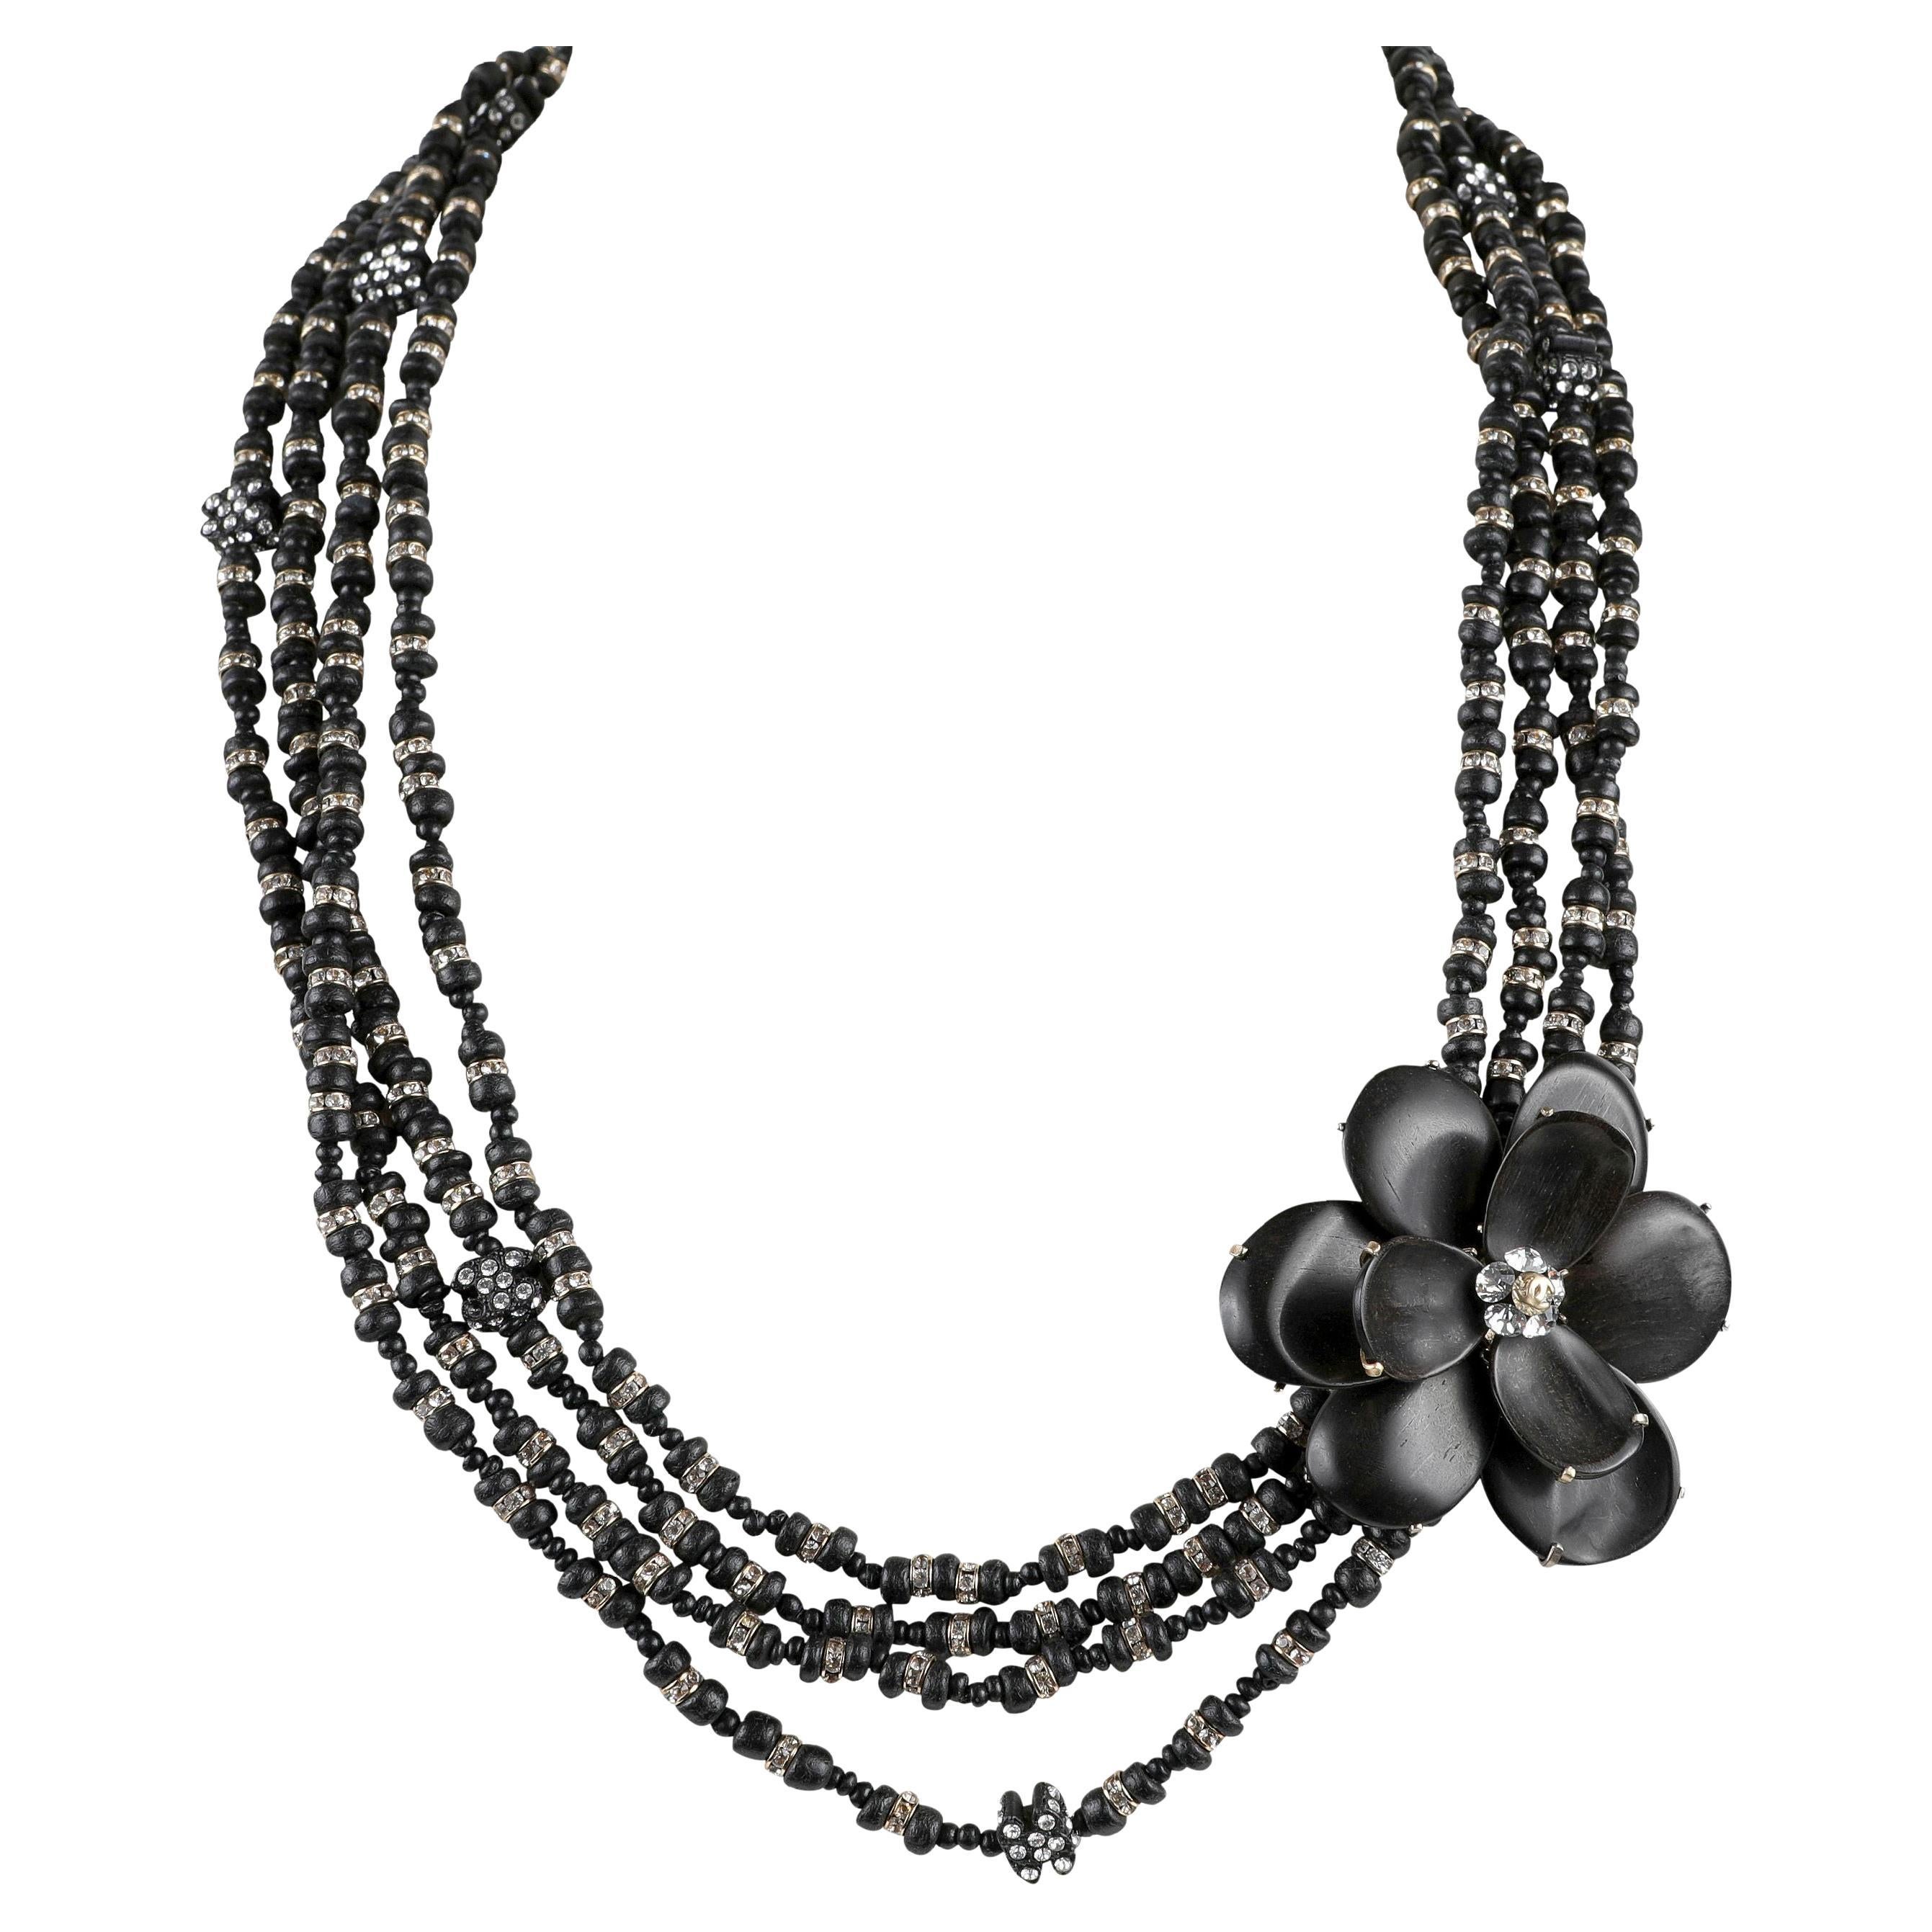 Chanel Black Wooden Beads and Camellia Flower Necklace